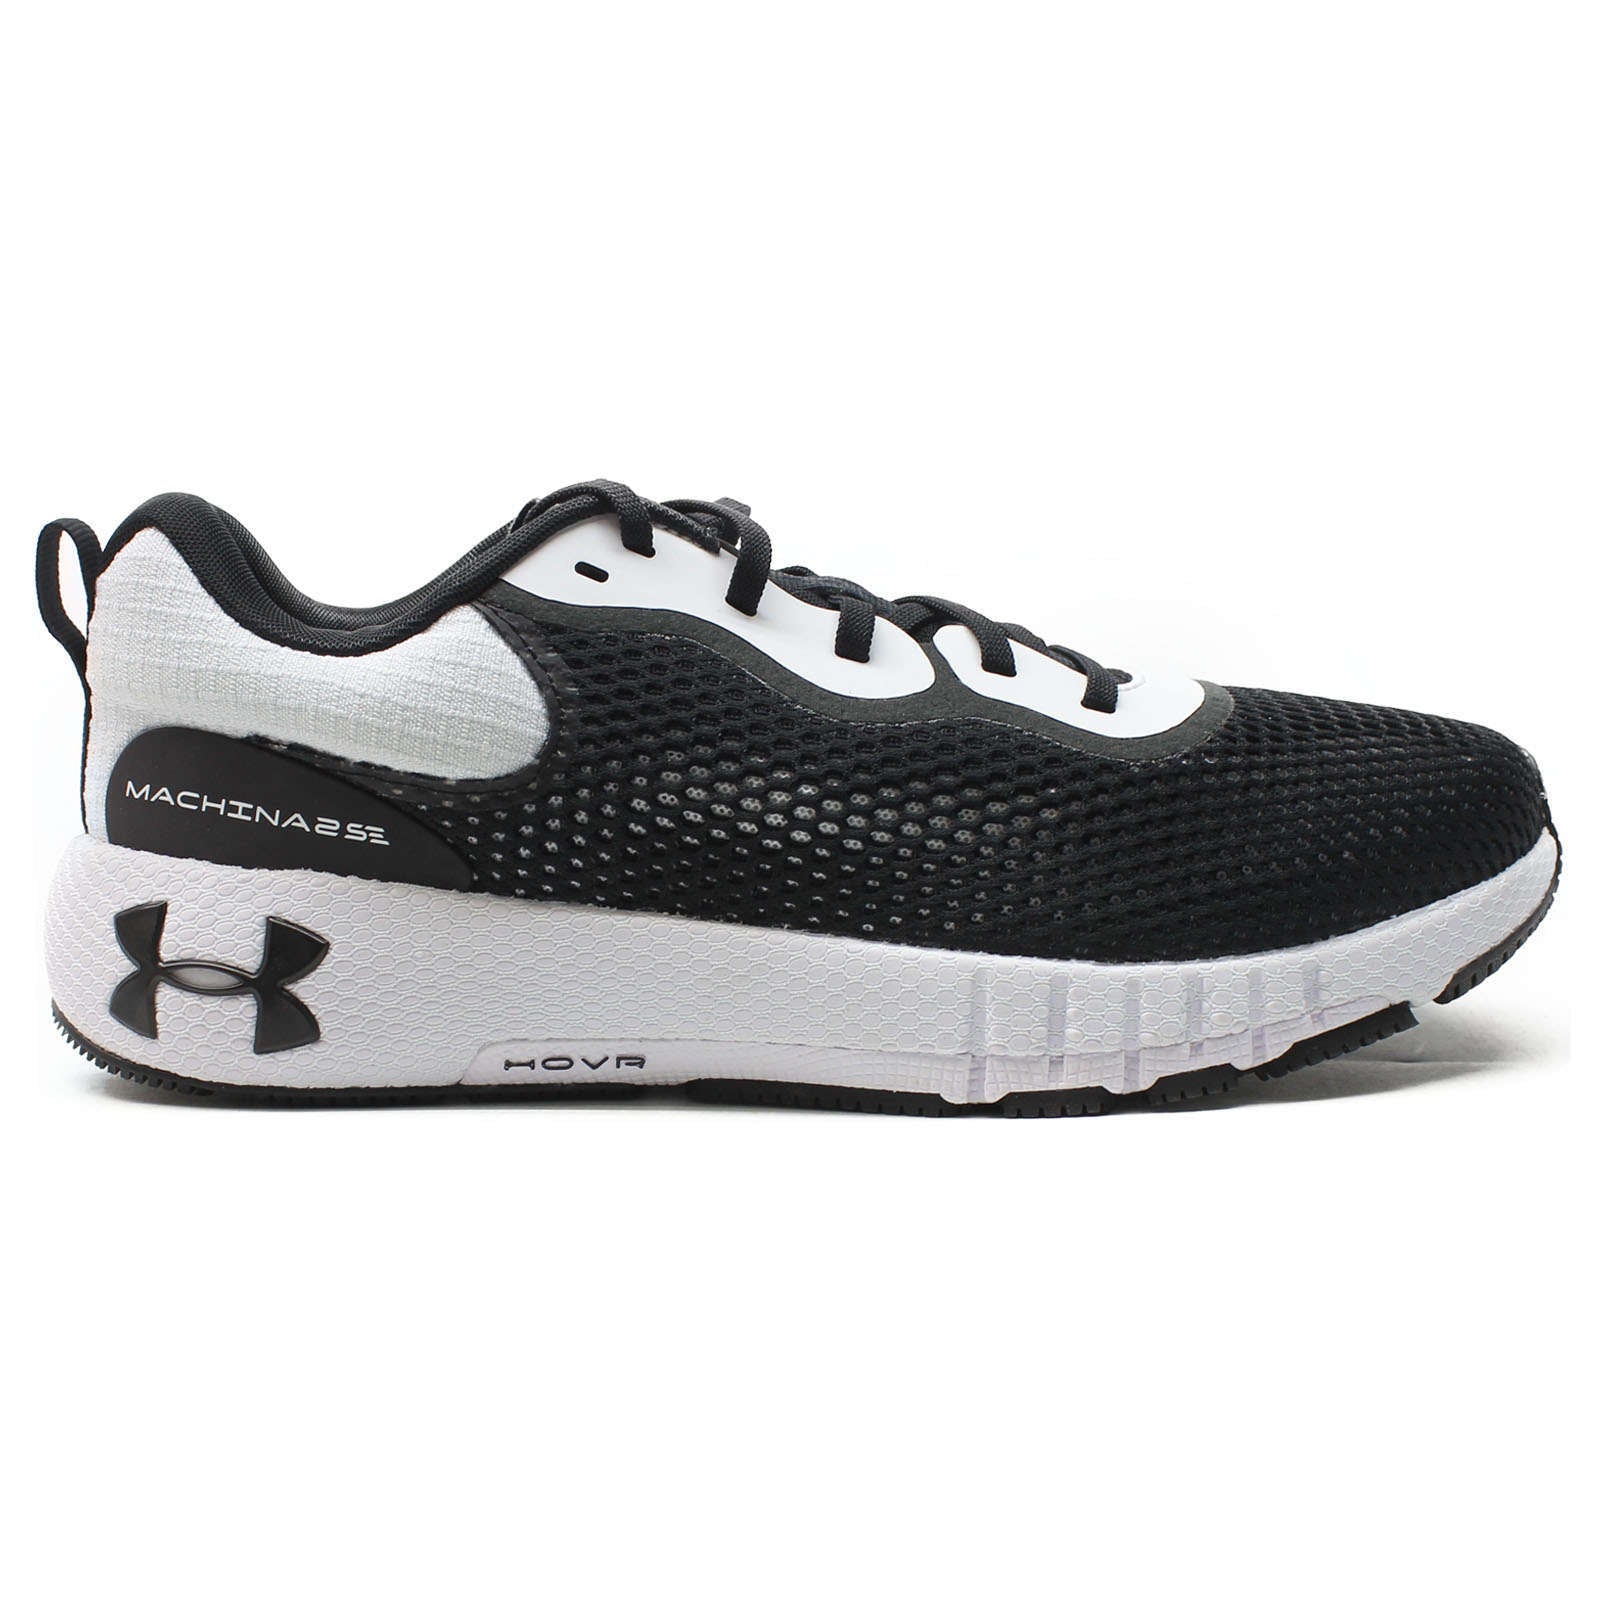 Under Armour HOVR Machina 2 Se Synthetic Textile Men's Low-Top Sneakers#color_black white